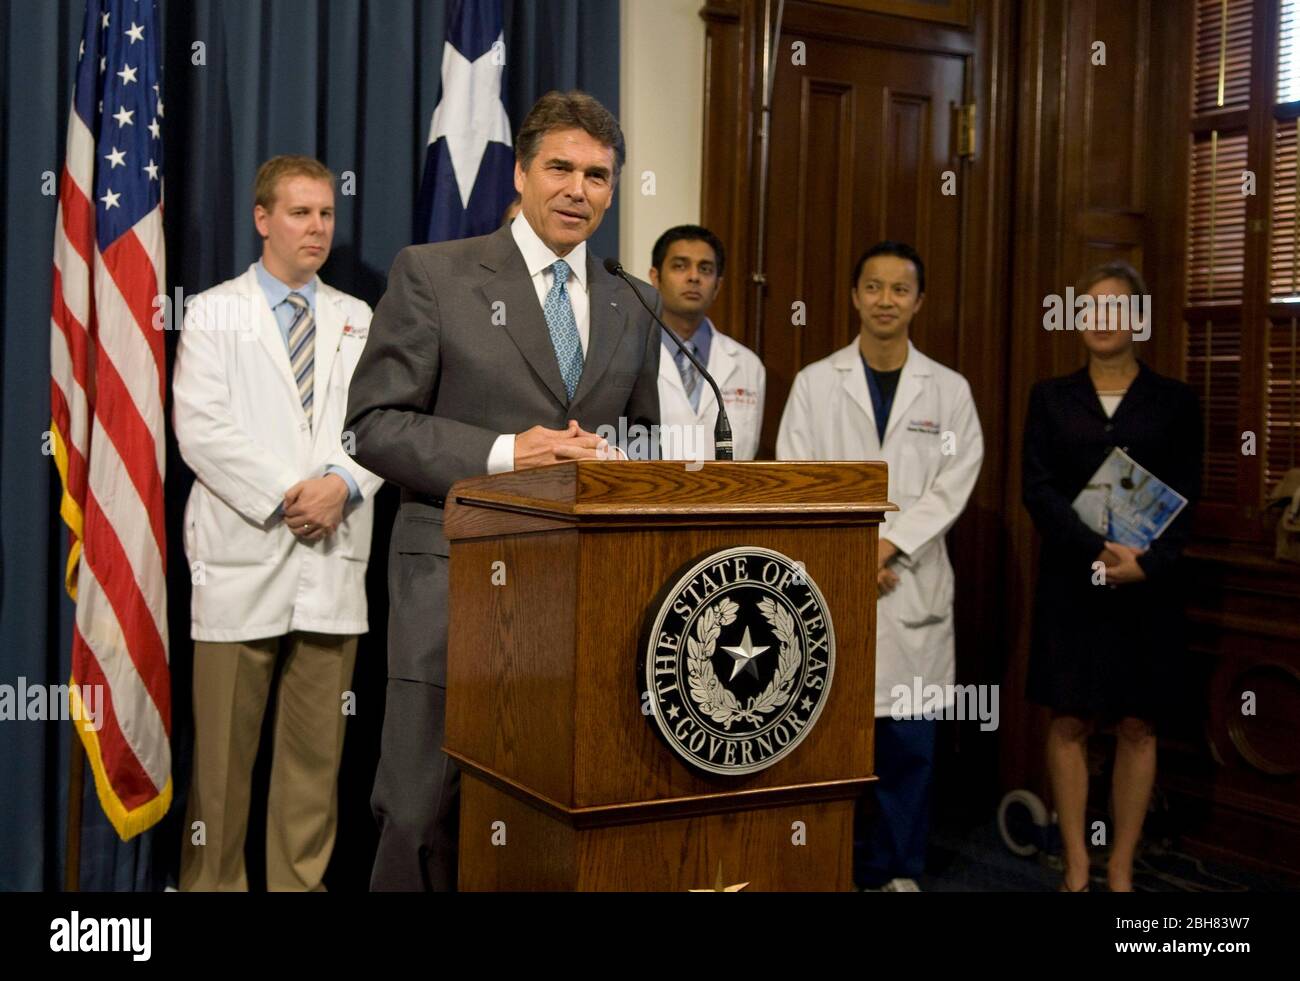 Austin , Texas - Texas Governor Rick Perry speaks at press conference announcing the findings of at Texas Public Policy Foundation studey about health care reform. August 18th, 2009  ©Marjorie Kamys Cotera / Daemmrich Photos Stock Photo